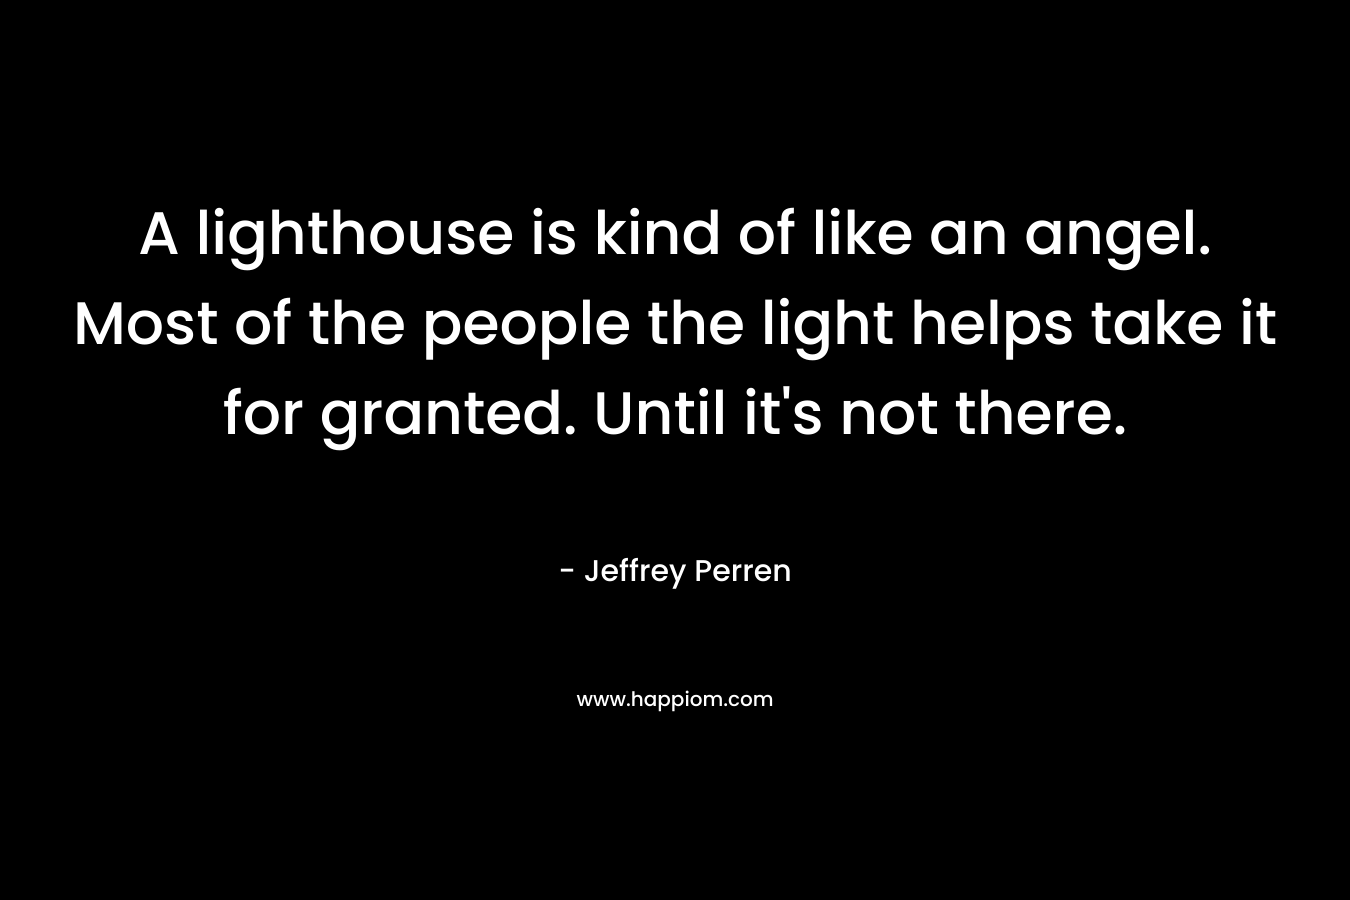 A lighthouse is kind of like an angel. Most of the people the light helps take it for granted. Until it’s not there. – Jeffrey Perren